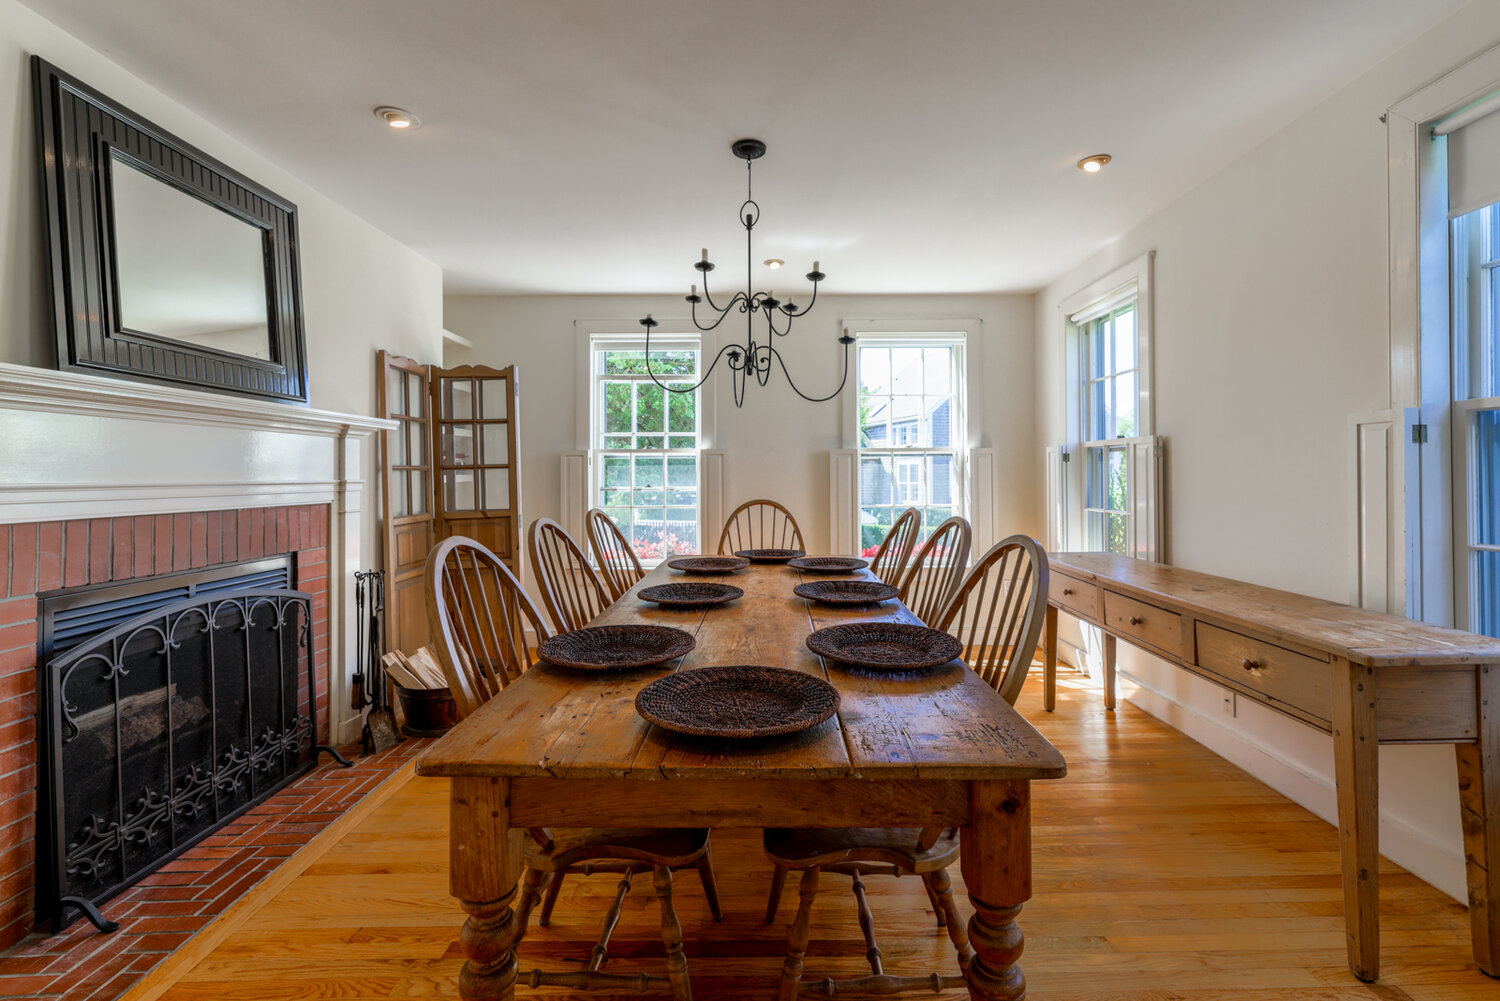 The dining room has wood floors, a wood-manteled fireplace surrounded by red brick, and overlooks the front yard.